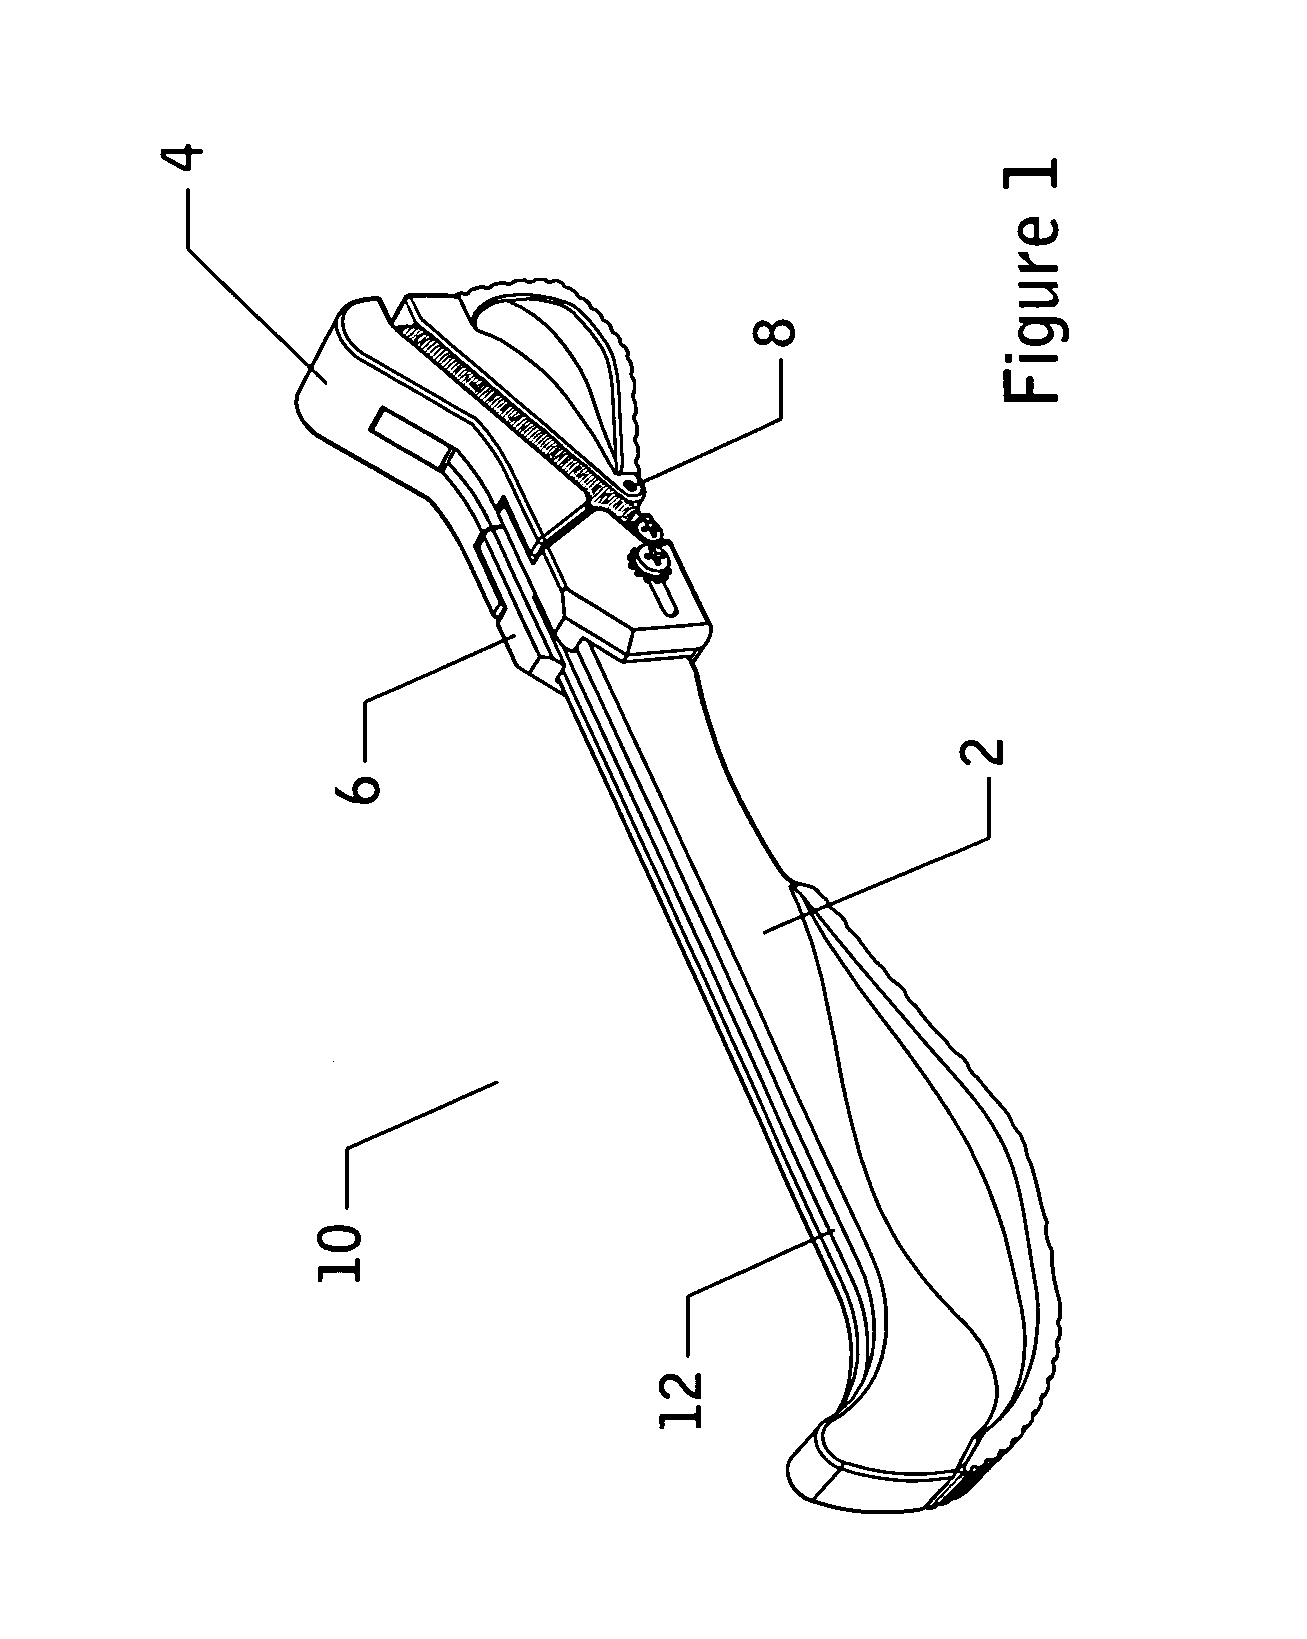 Skate guard and walking device